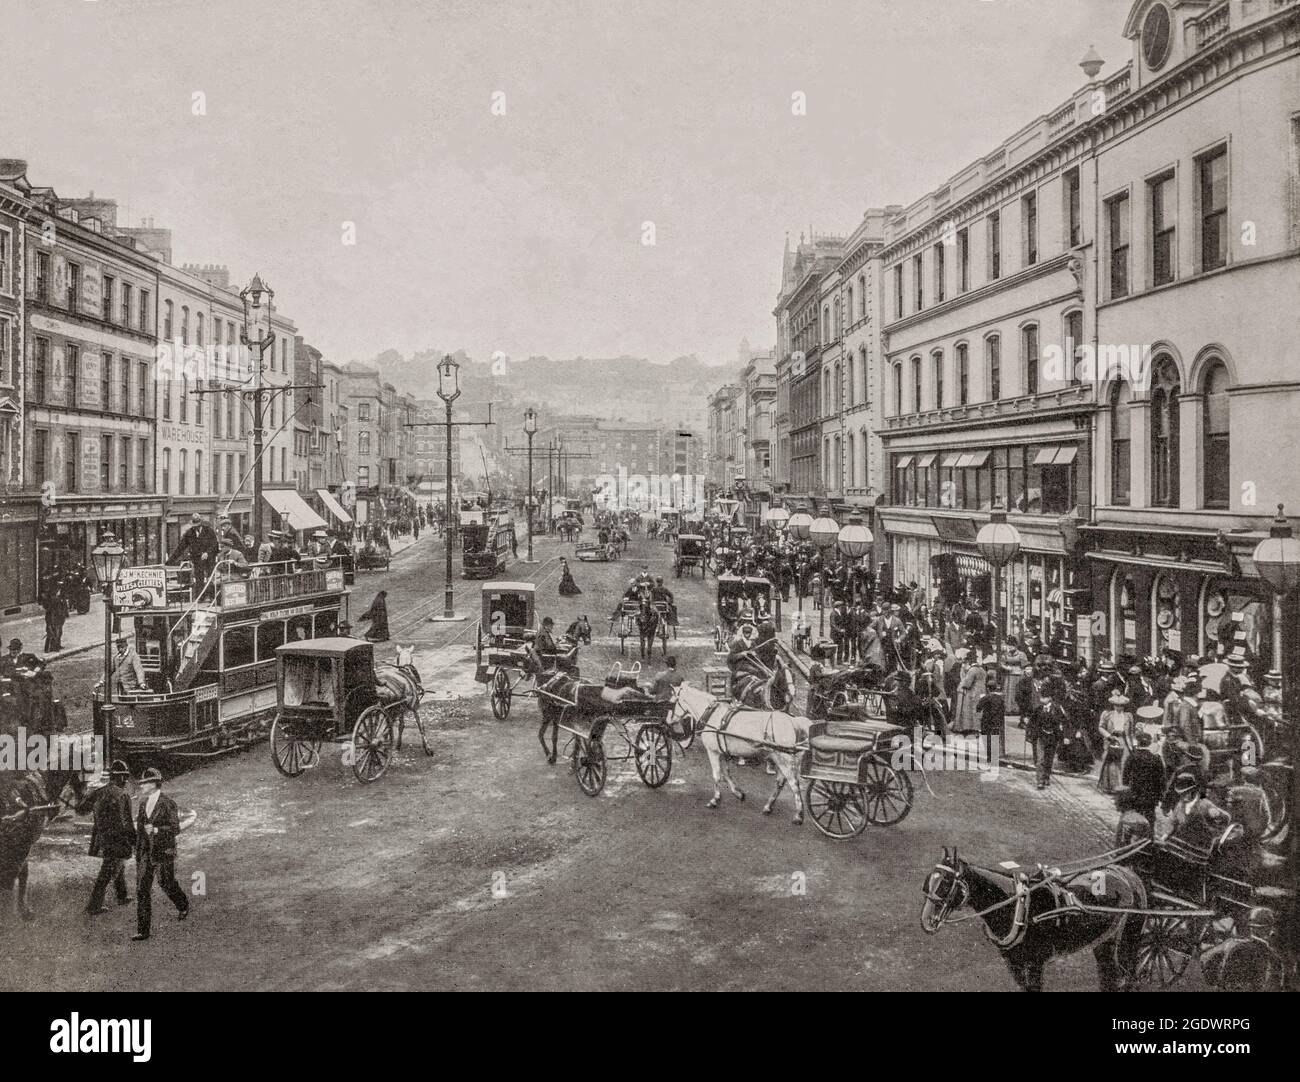 An early 20th century view of St Patrick's Street in Cork City, the second largest city in Ireland. The street dates from the late 18th century, when the city expanded beyond the walls of the ancient city, which was centered on North and South Main Streets. From 1898 to 1931, the street was served by the Cork Electric Tramways and Lighting Company when services started on 22 December 1898. Stock Photo